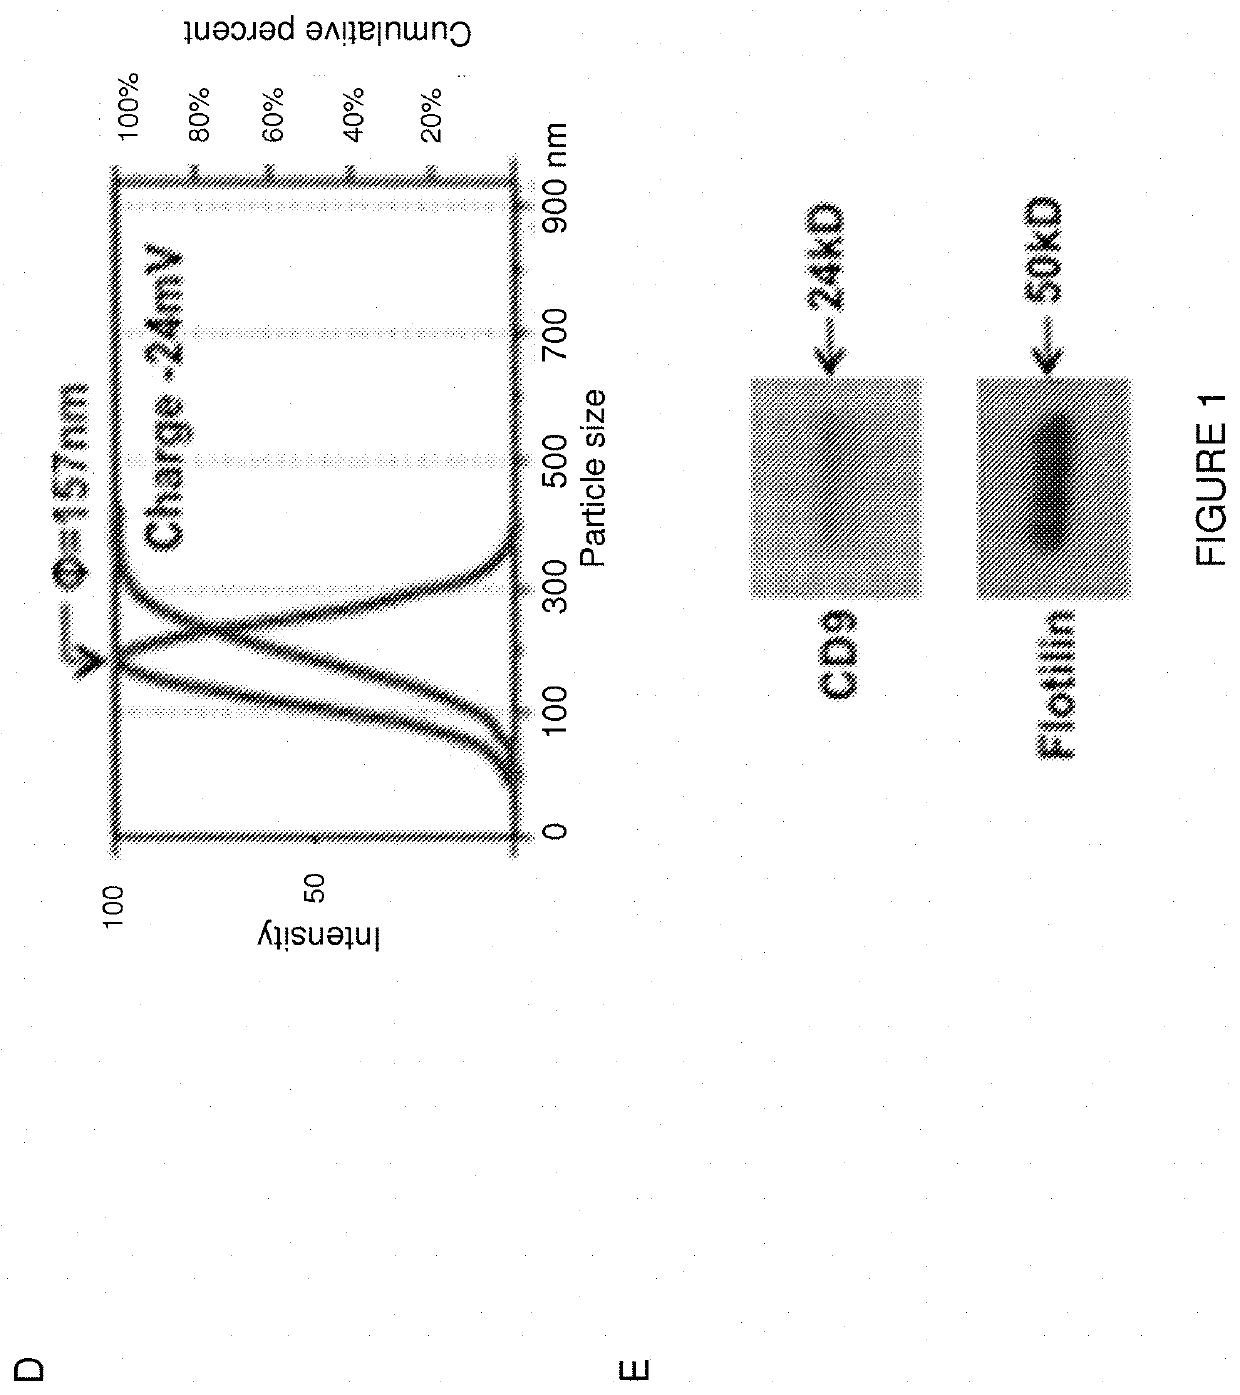 Methods of delivering heparin binding epidermal growth factor using stem cell generated exosomes